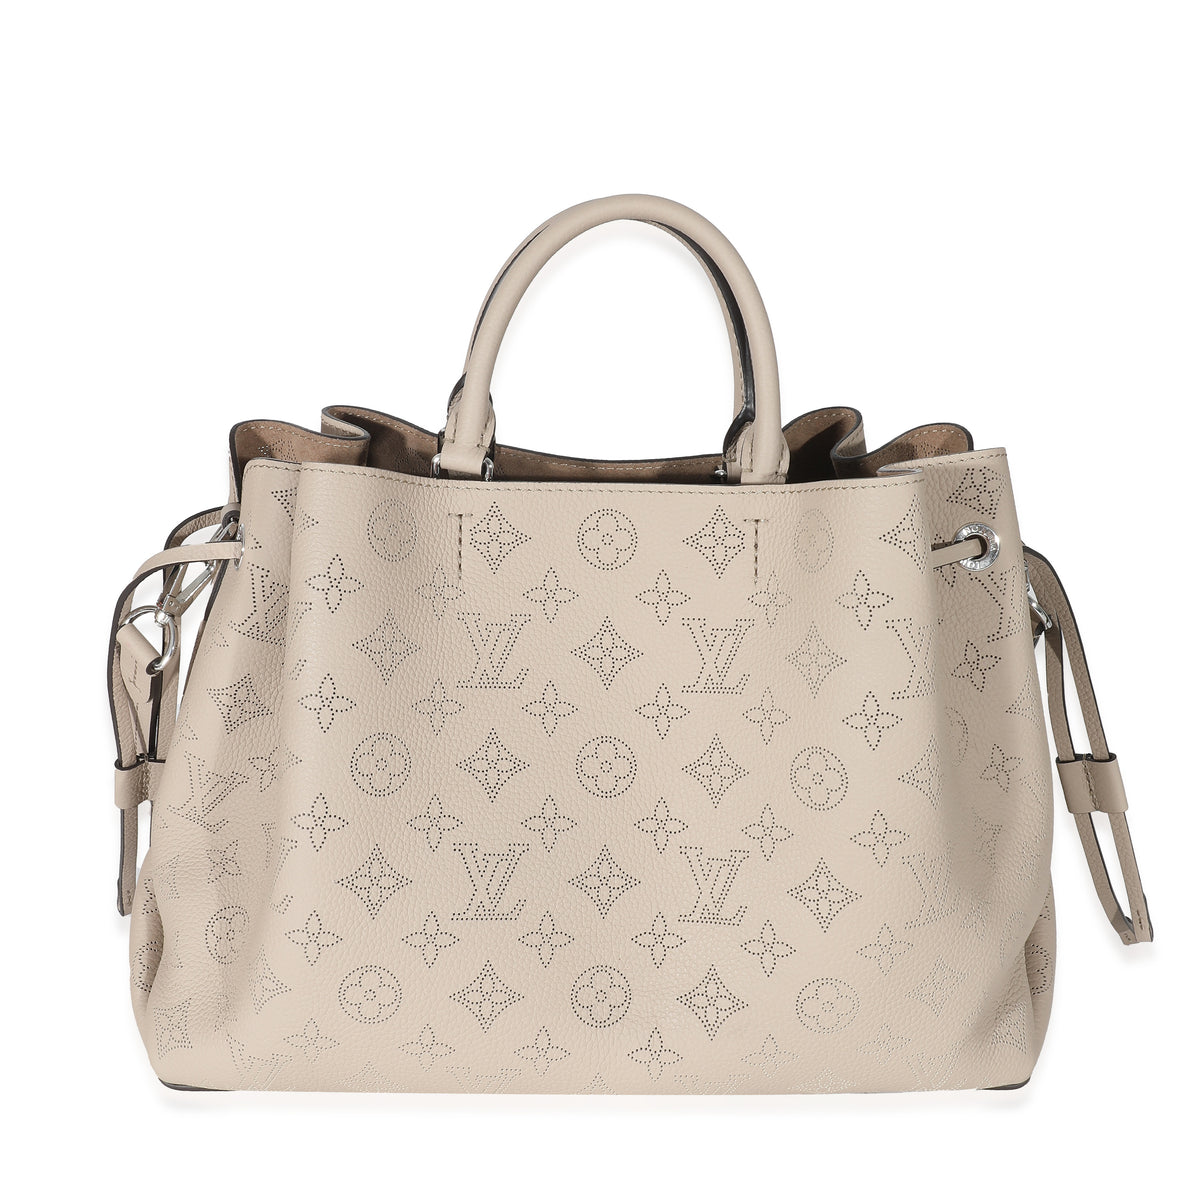 LOUIS VUITTON Women's Mahina Bella Tote Leather in Blue